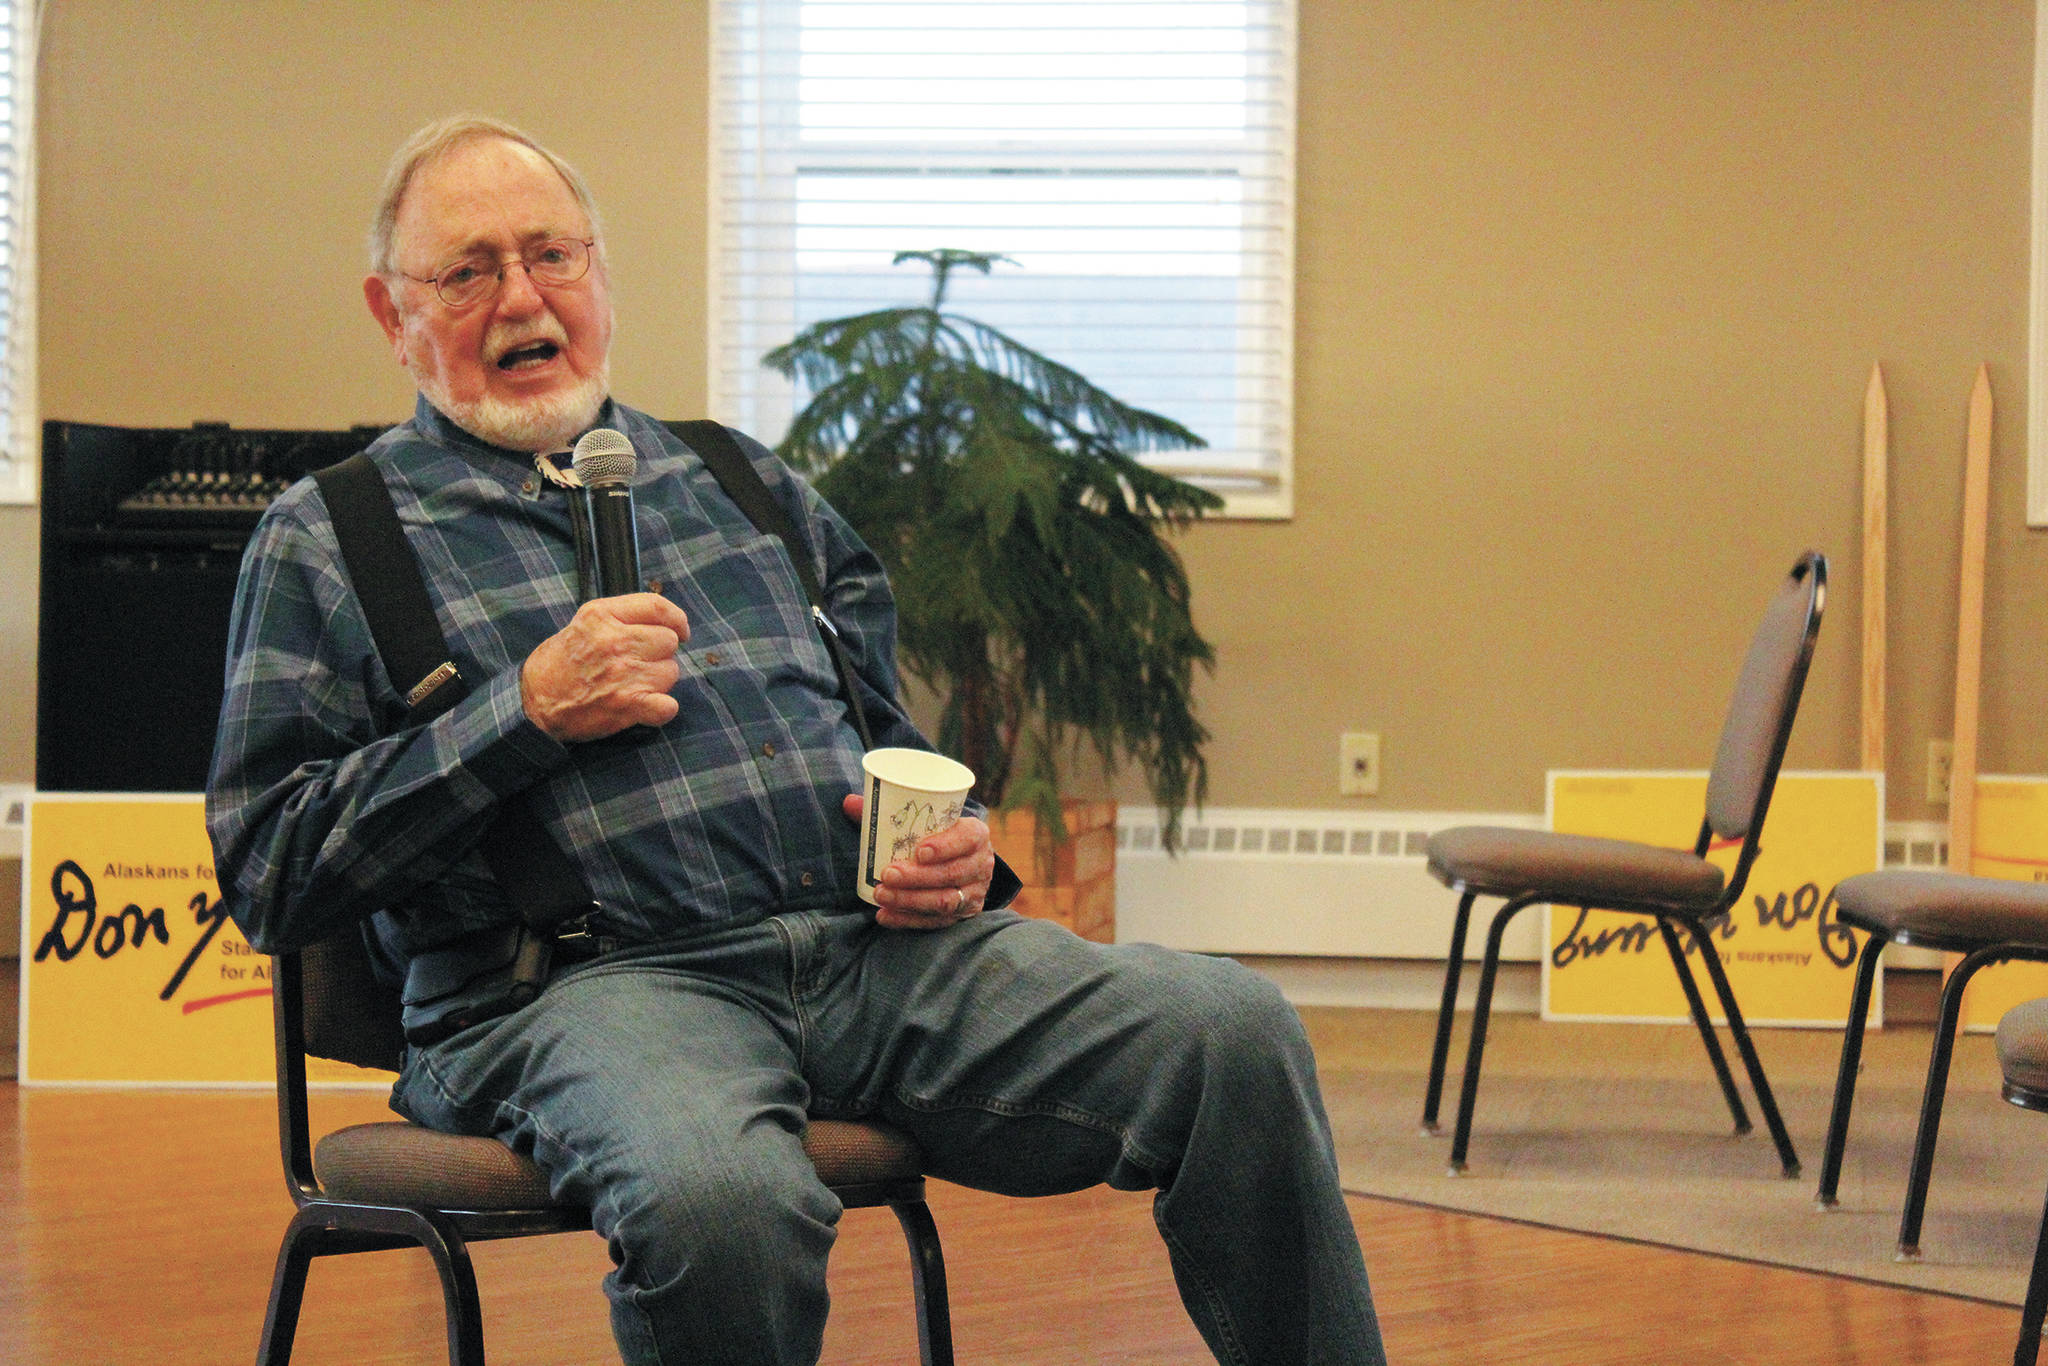 Rep. Don Young speaks during a campaign event Tuesday, Oct. 20, 2020 at Land’s End Resort in Homer, Alaska. (Photo by Megan Pacer/Homer News)